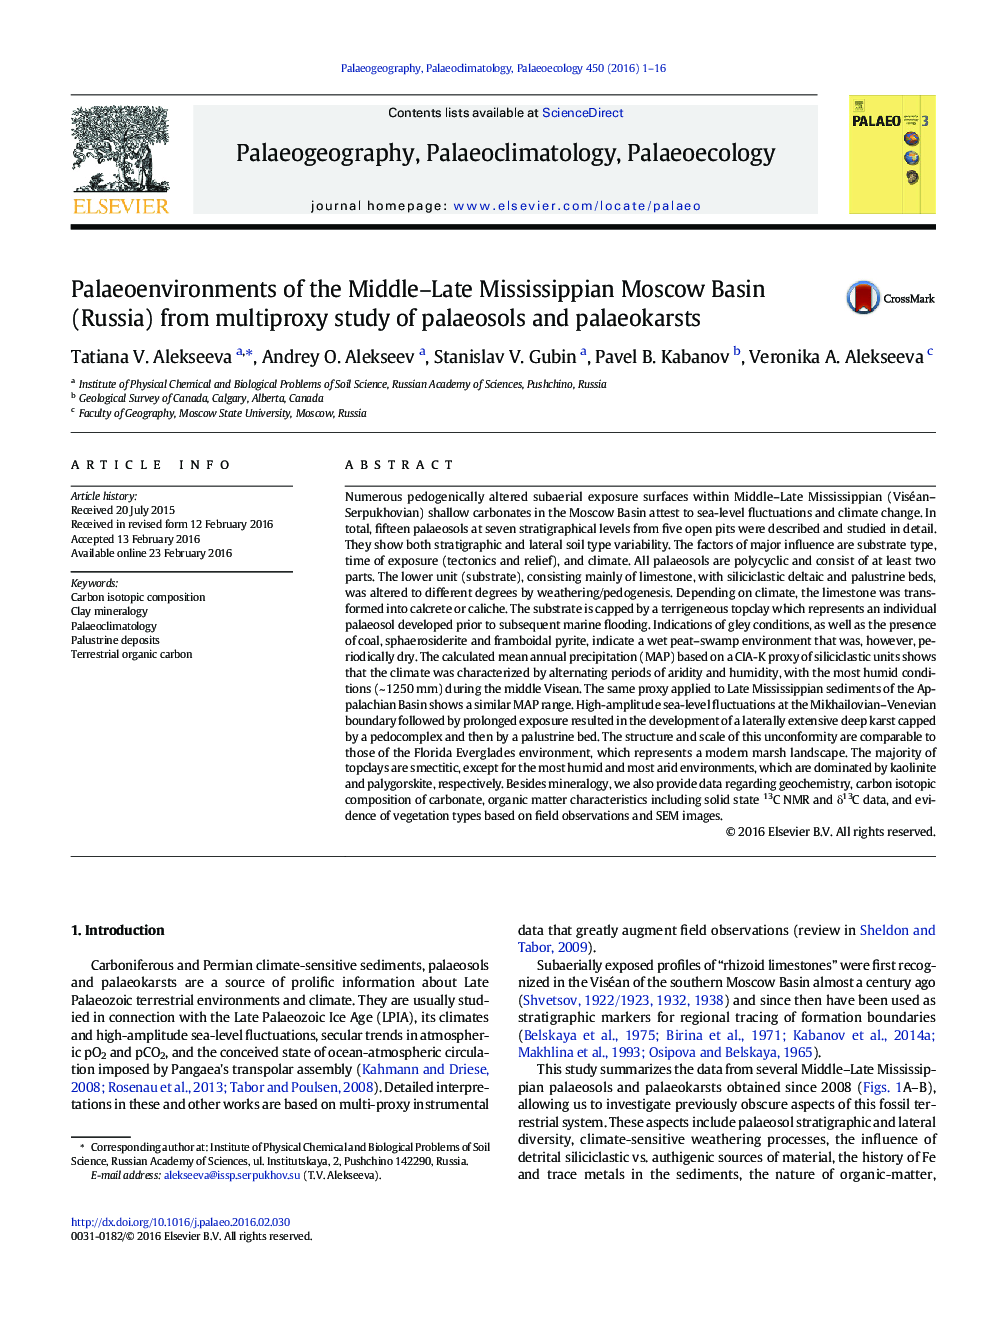 Palaeoenvironments of the Middle–Late Mississippian Moscow Basin (Russia) from multiproxy study of palaeosols and palaeokarsts